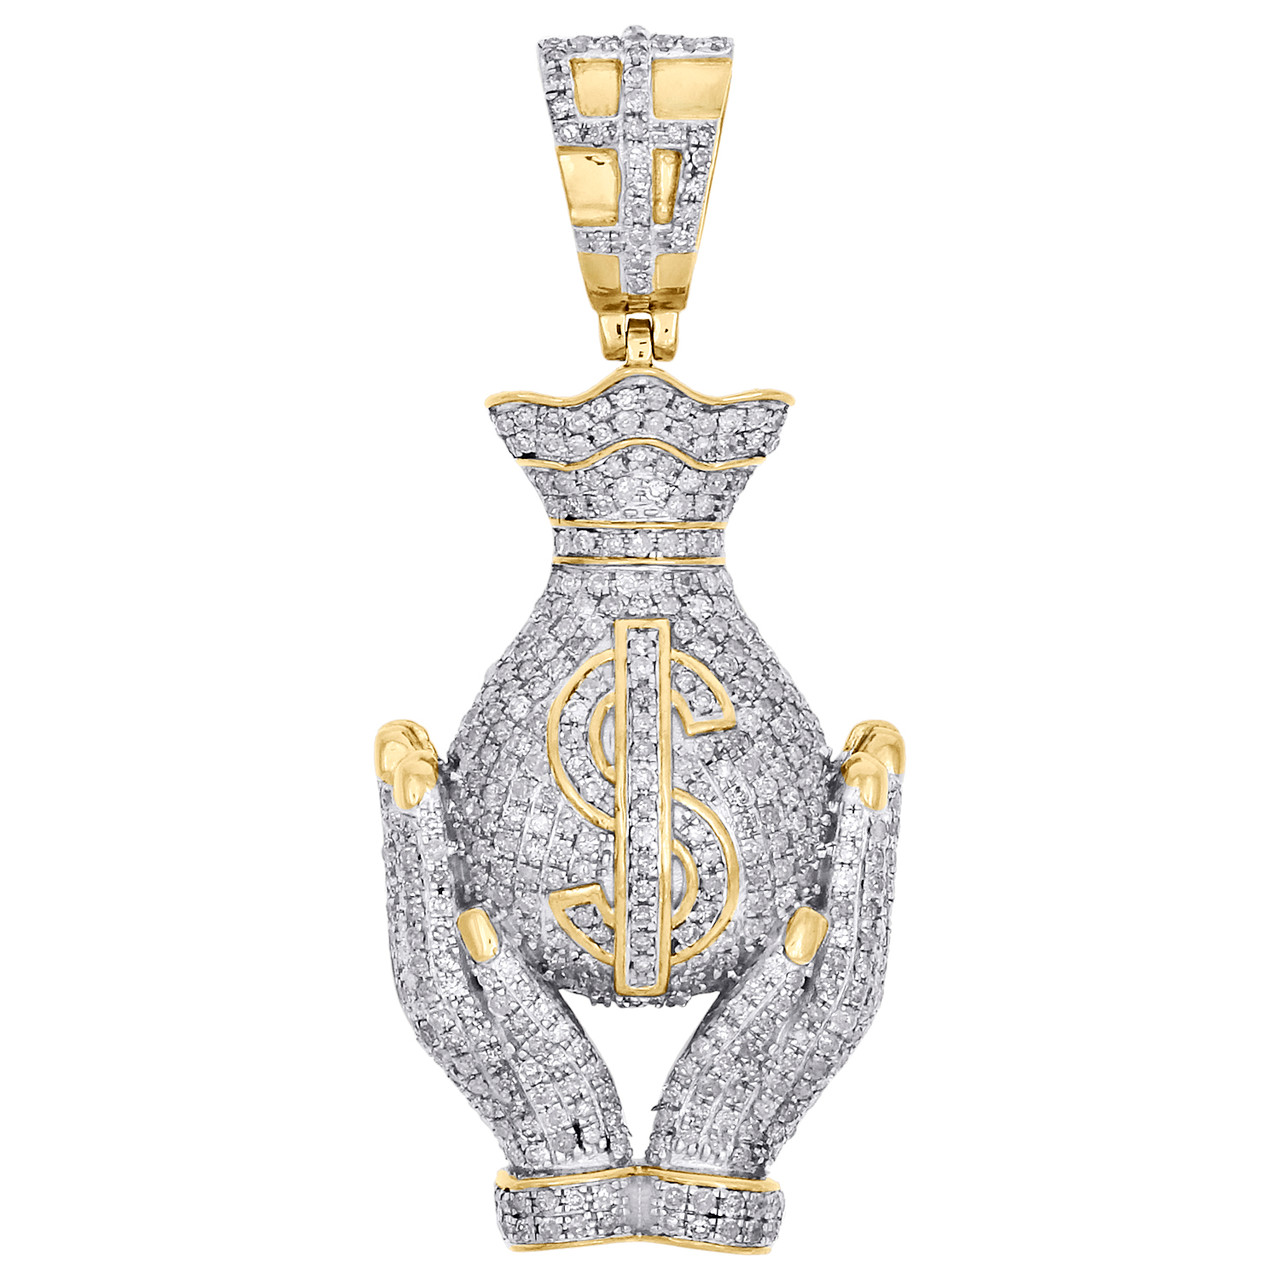 1/3 CT. T.W. Diamond Money Bag Necklace Charm in 10K Gold